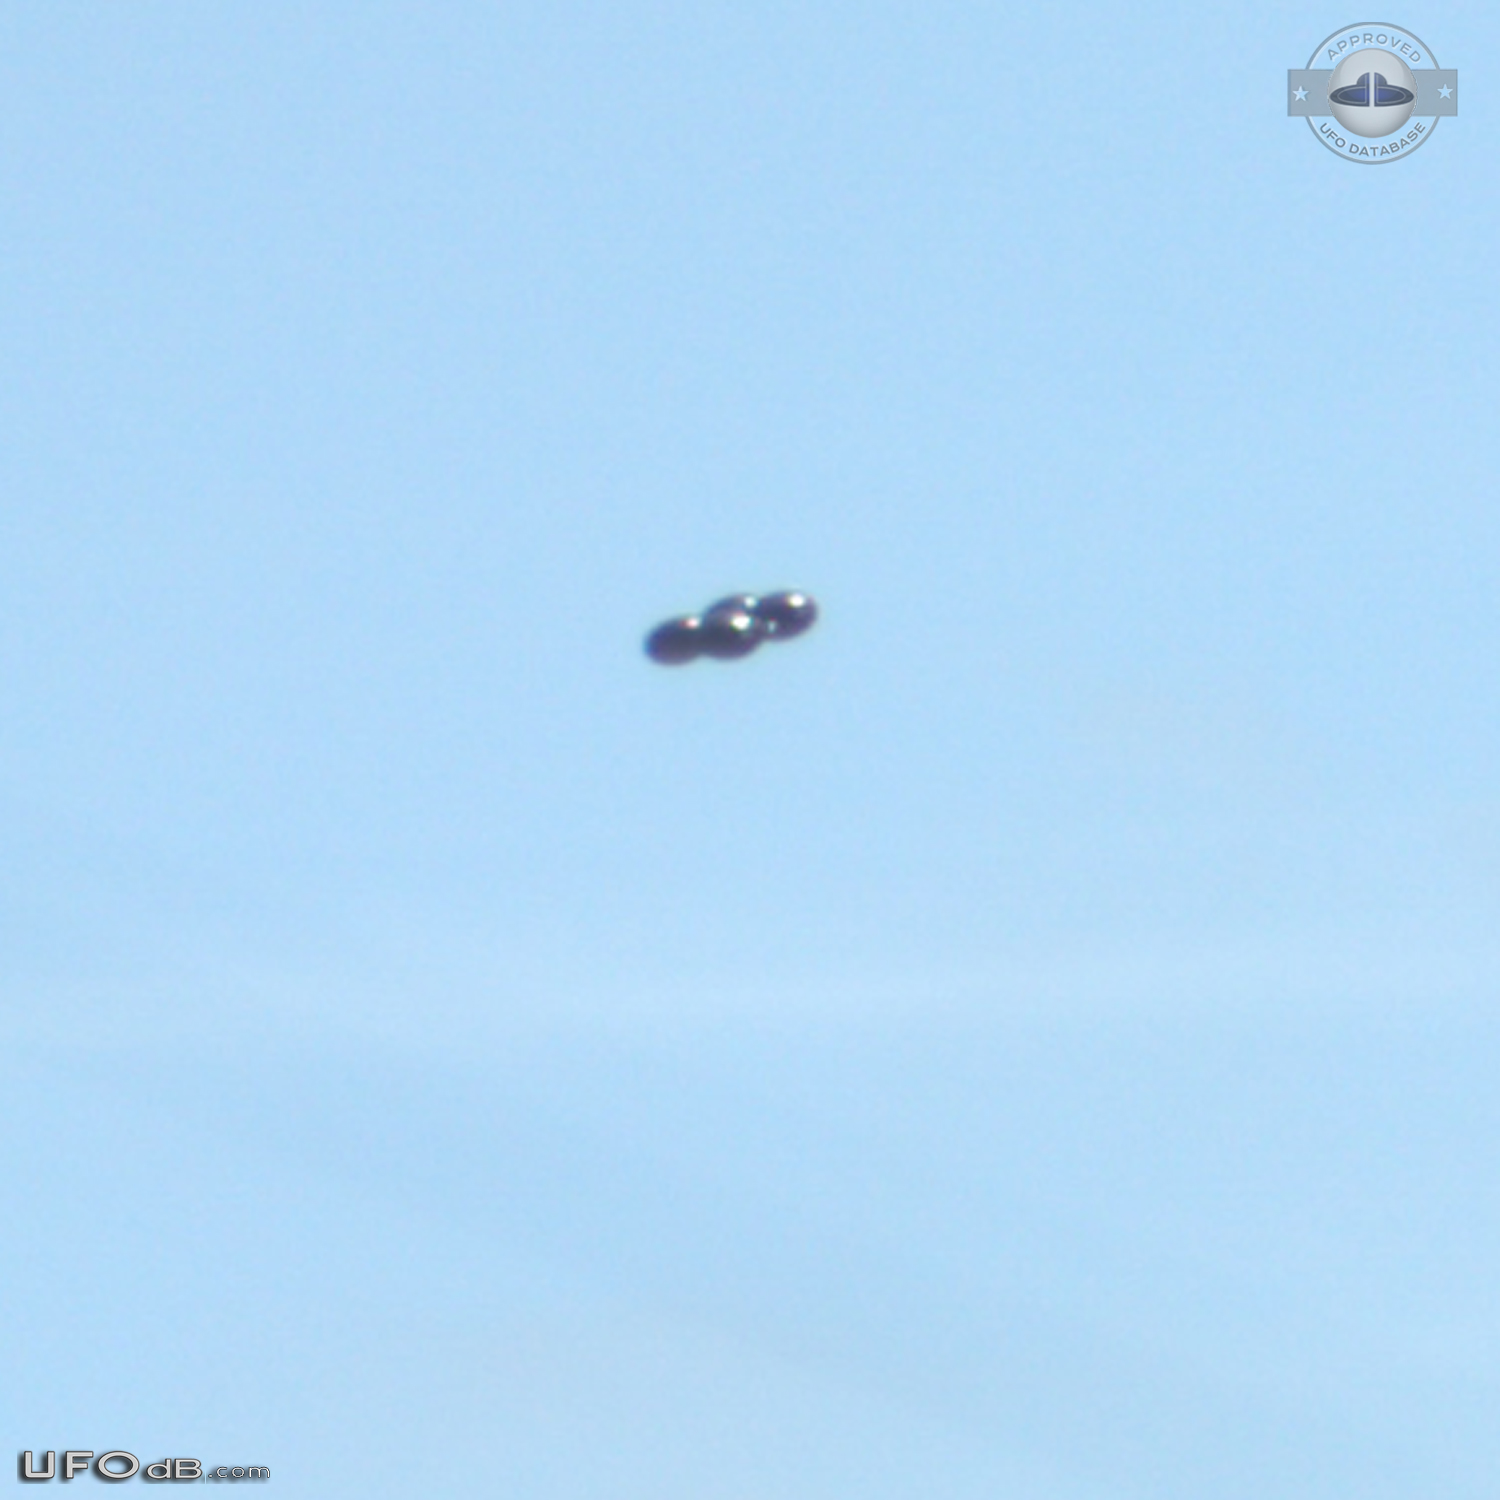 UFO with 4 Spheres over Austin Bergstrom Airport in Texas USA 2014 UFO Picture #670-6